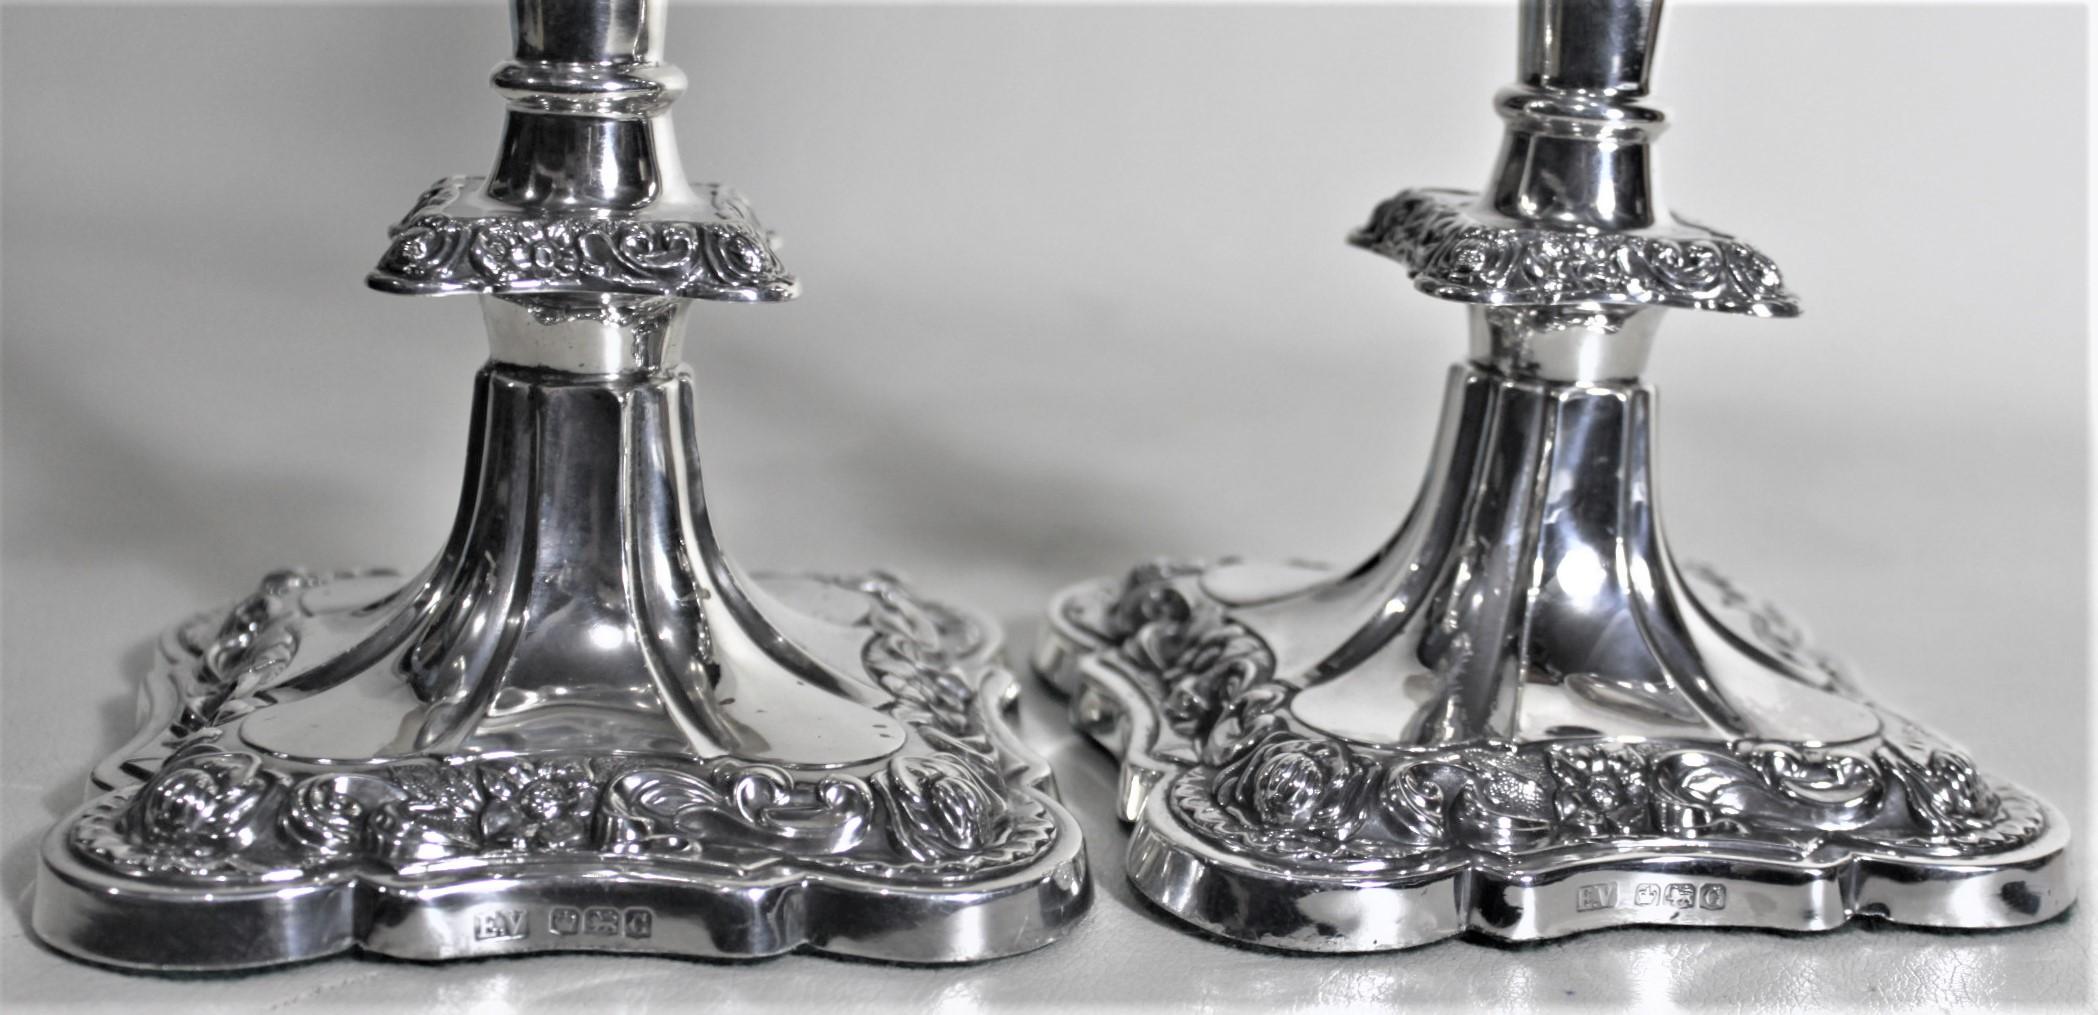 Pair of English Sterling Silver Candlesticks with Chased Floral Decoration 6